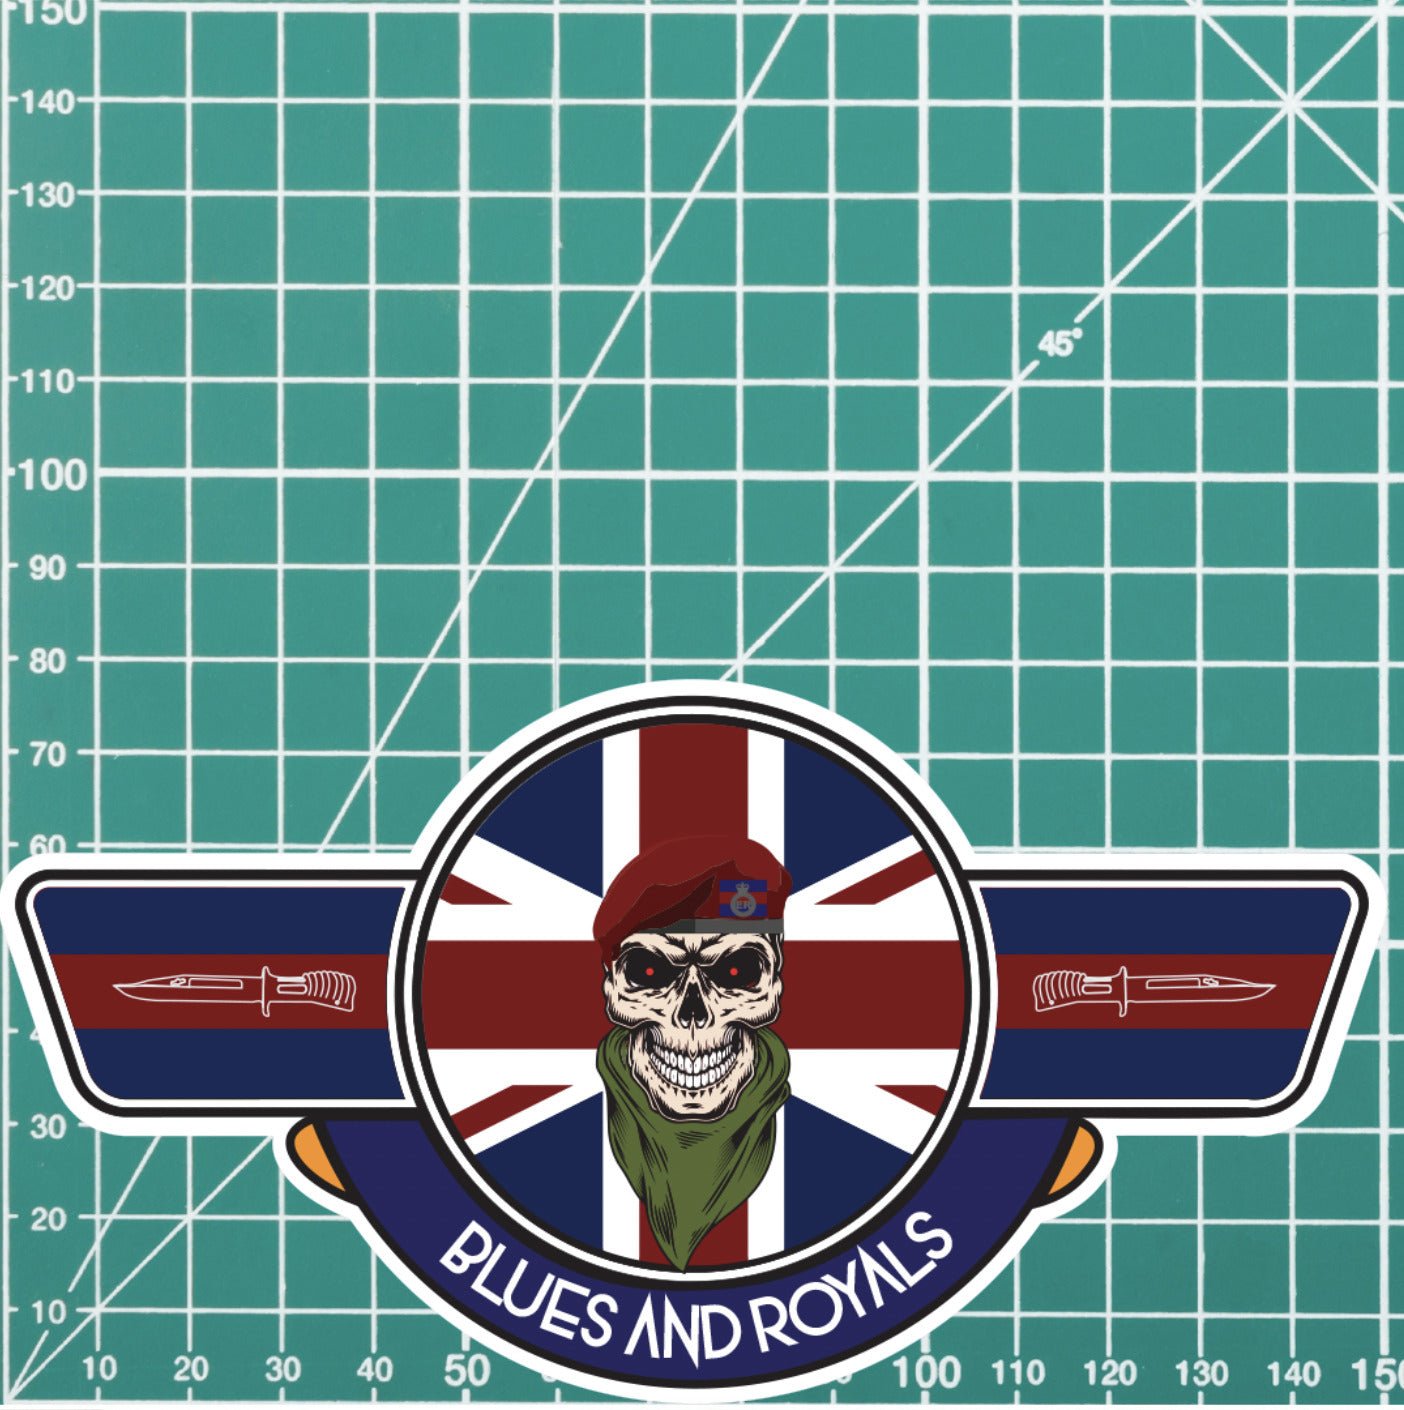 Blues and Royals Airborne UV Laminated Vinyl Sticker - Wings redplume